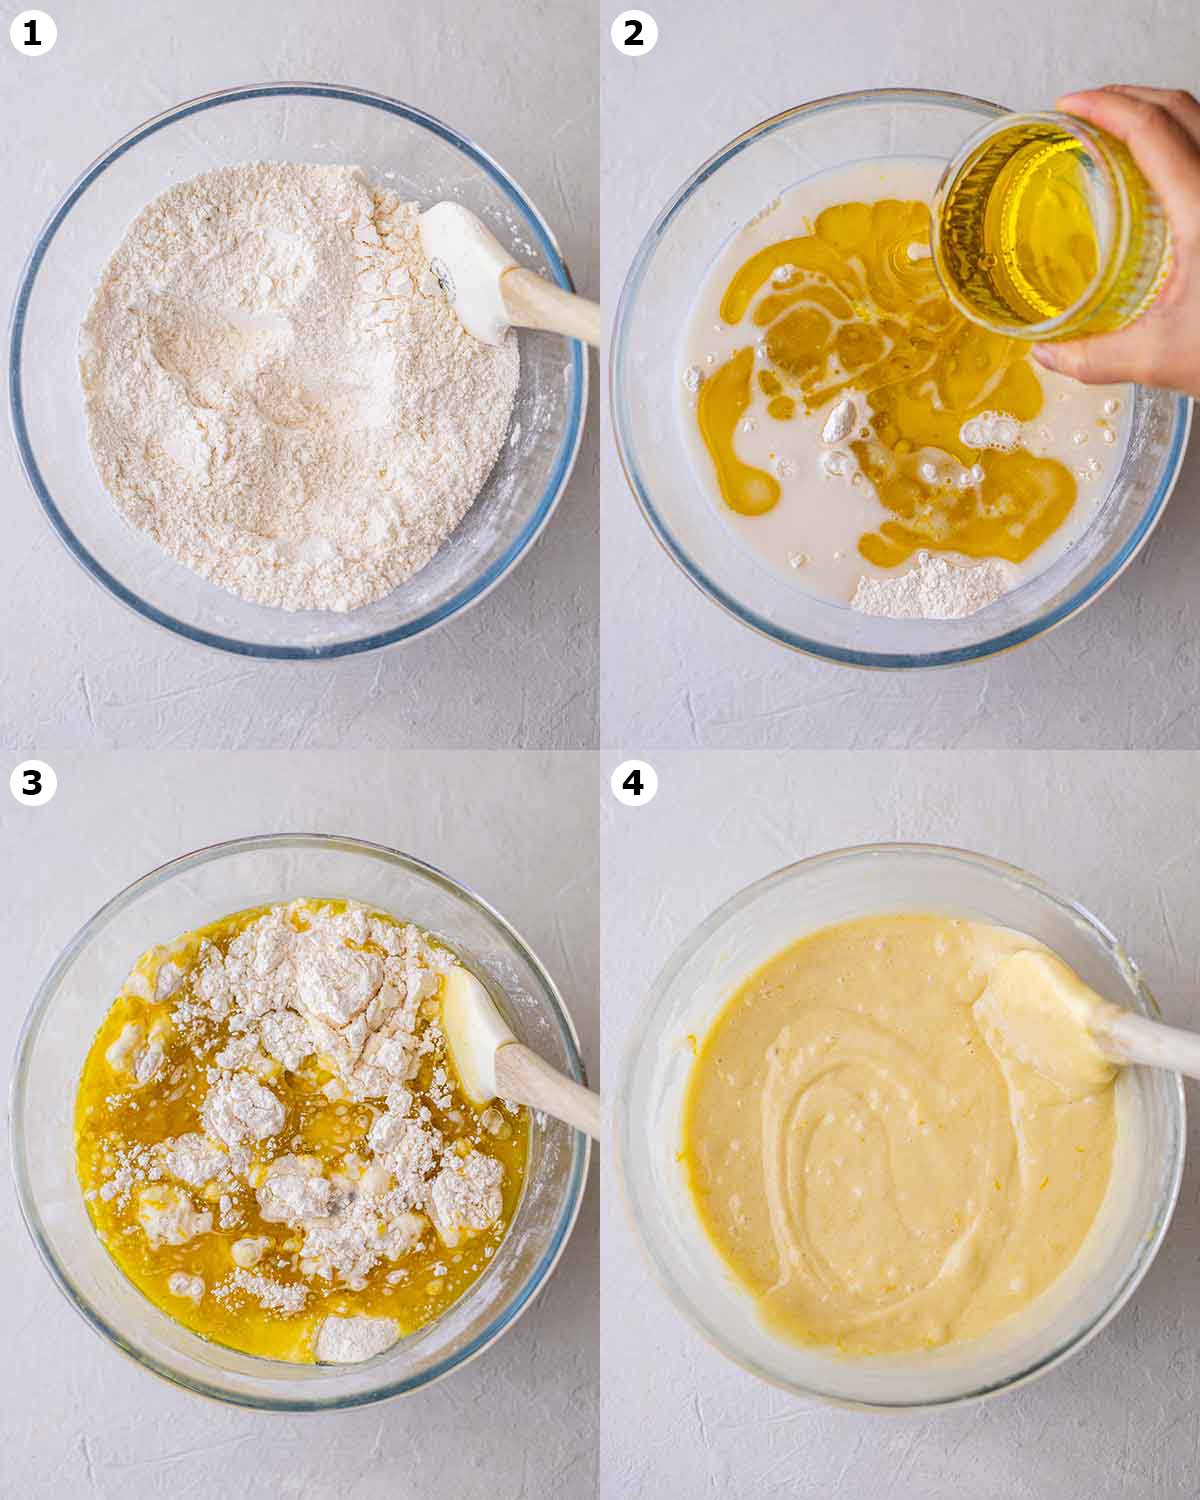 Four image collage of lemon cake batter in bowl including pouring the olive oil in the cake batter.